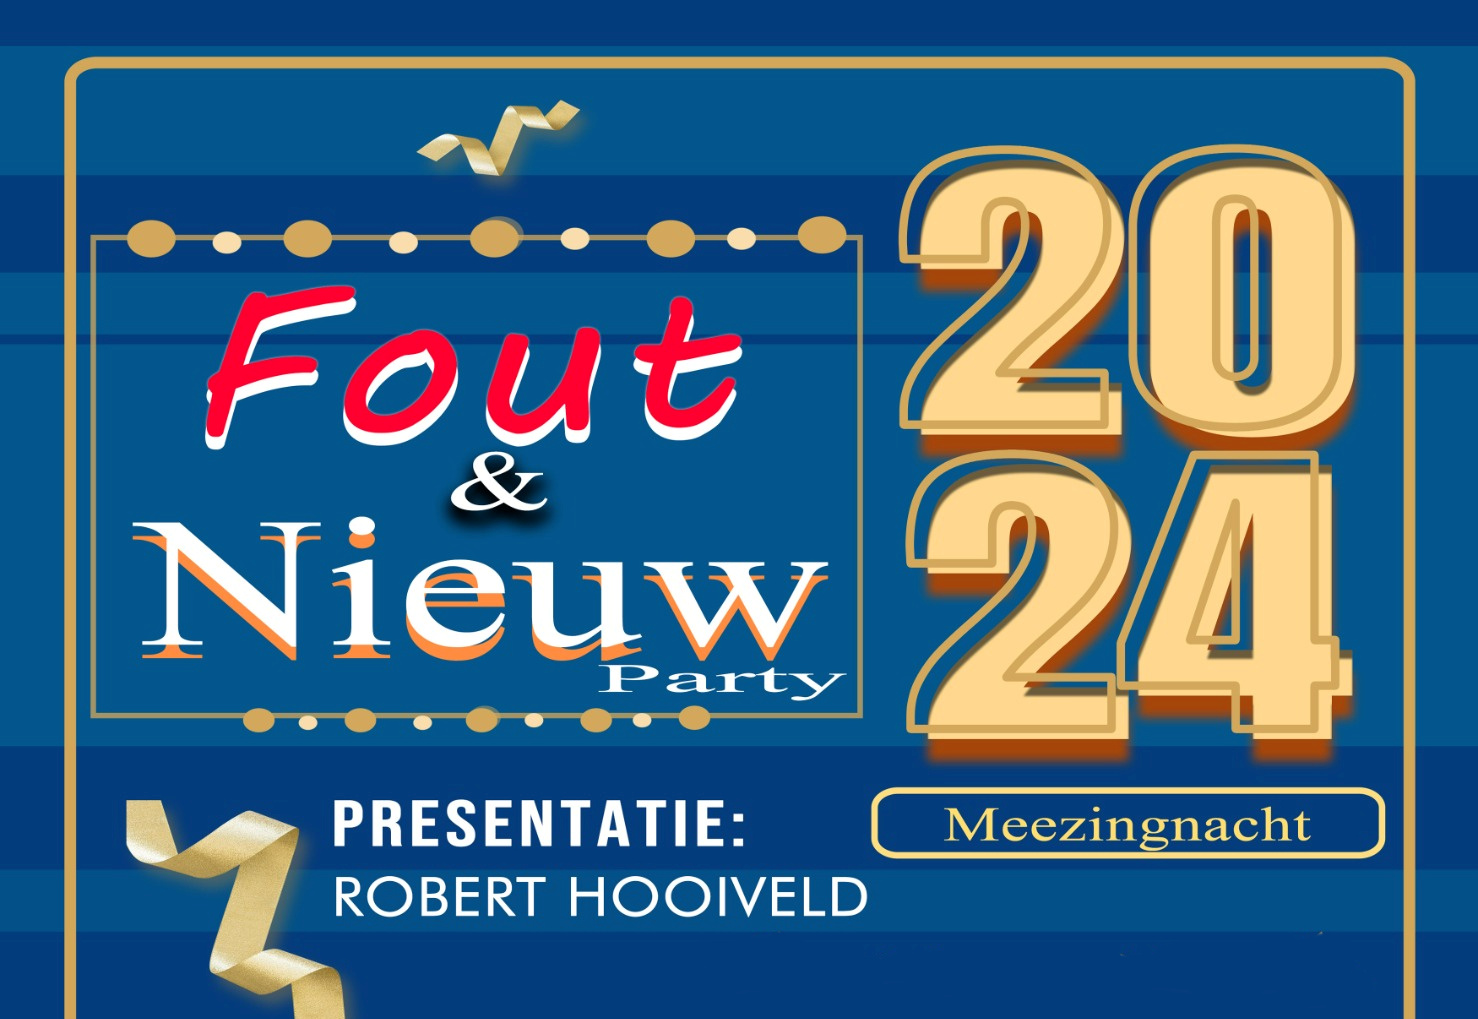 Fout & Nieuw Party